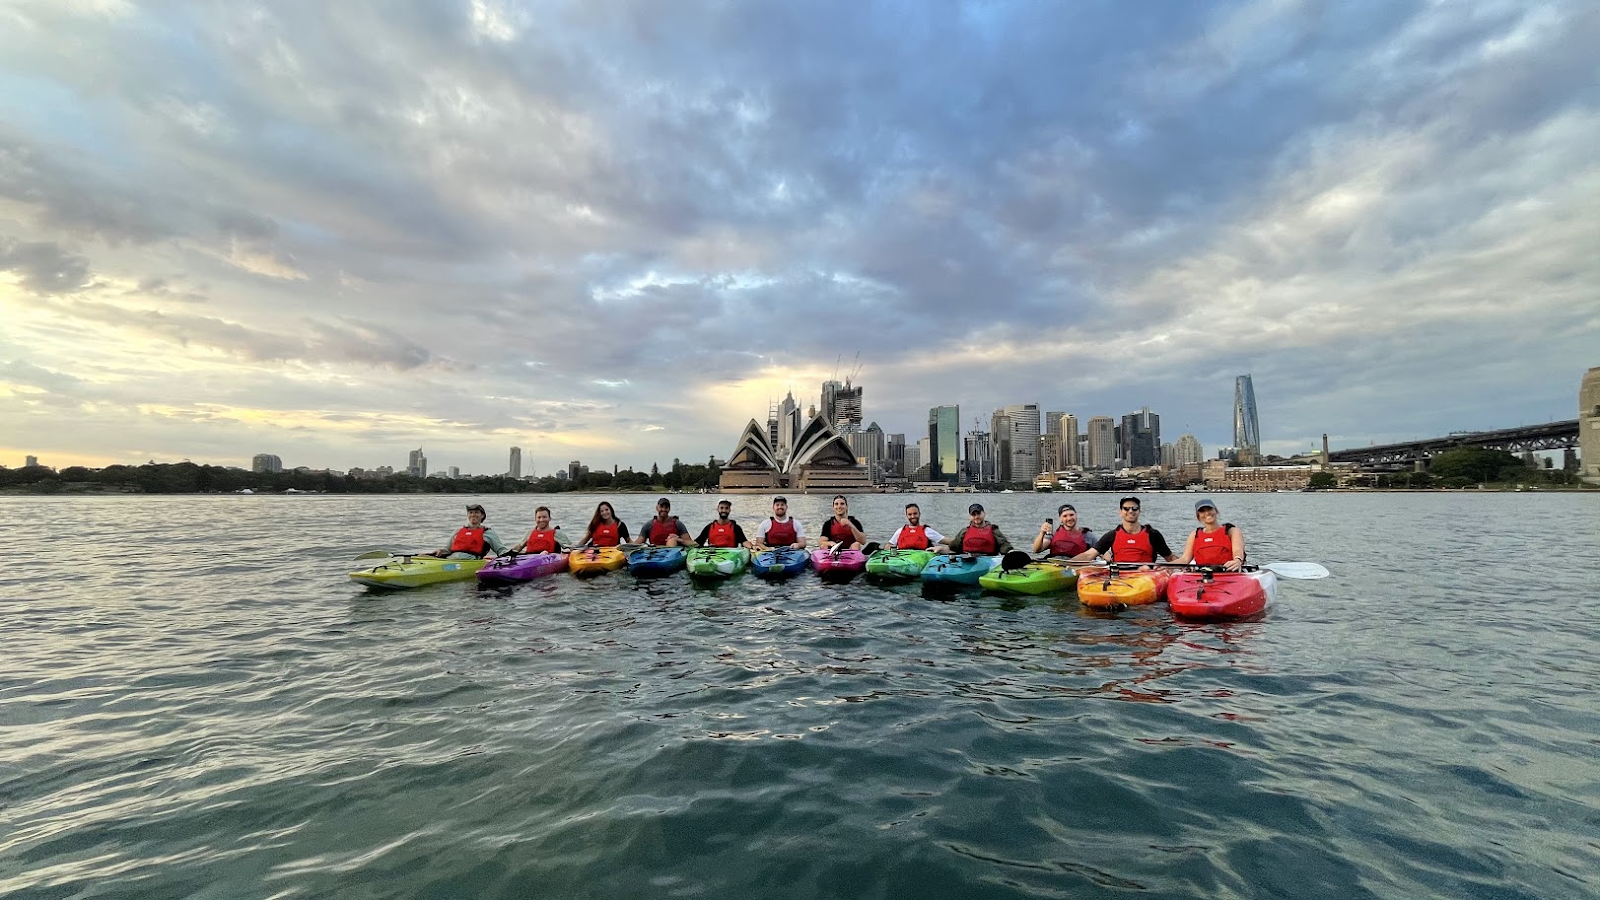 Iconic Landmarks You'll see with Sydney Kayaking Tours